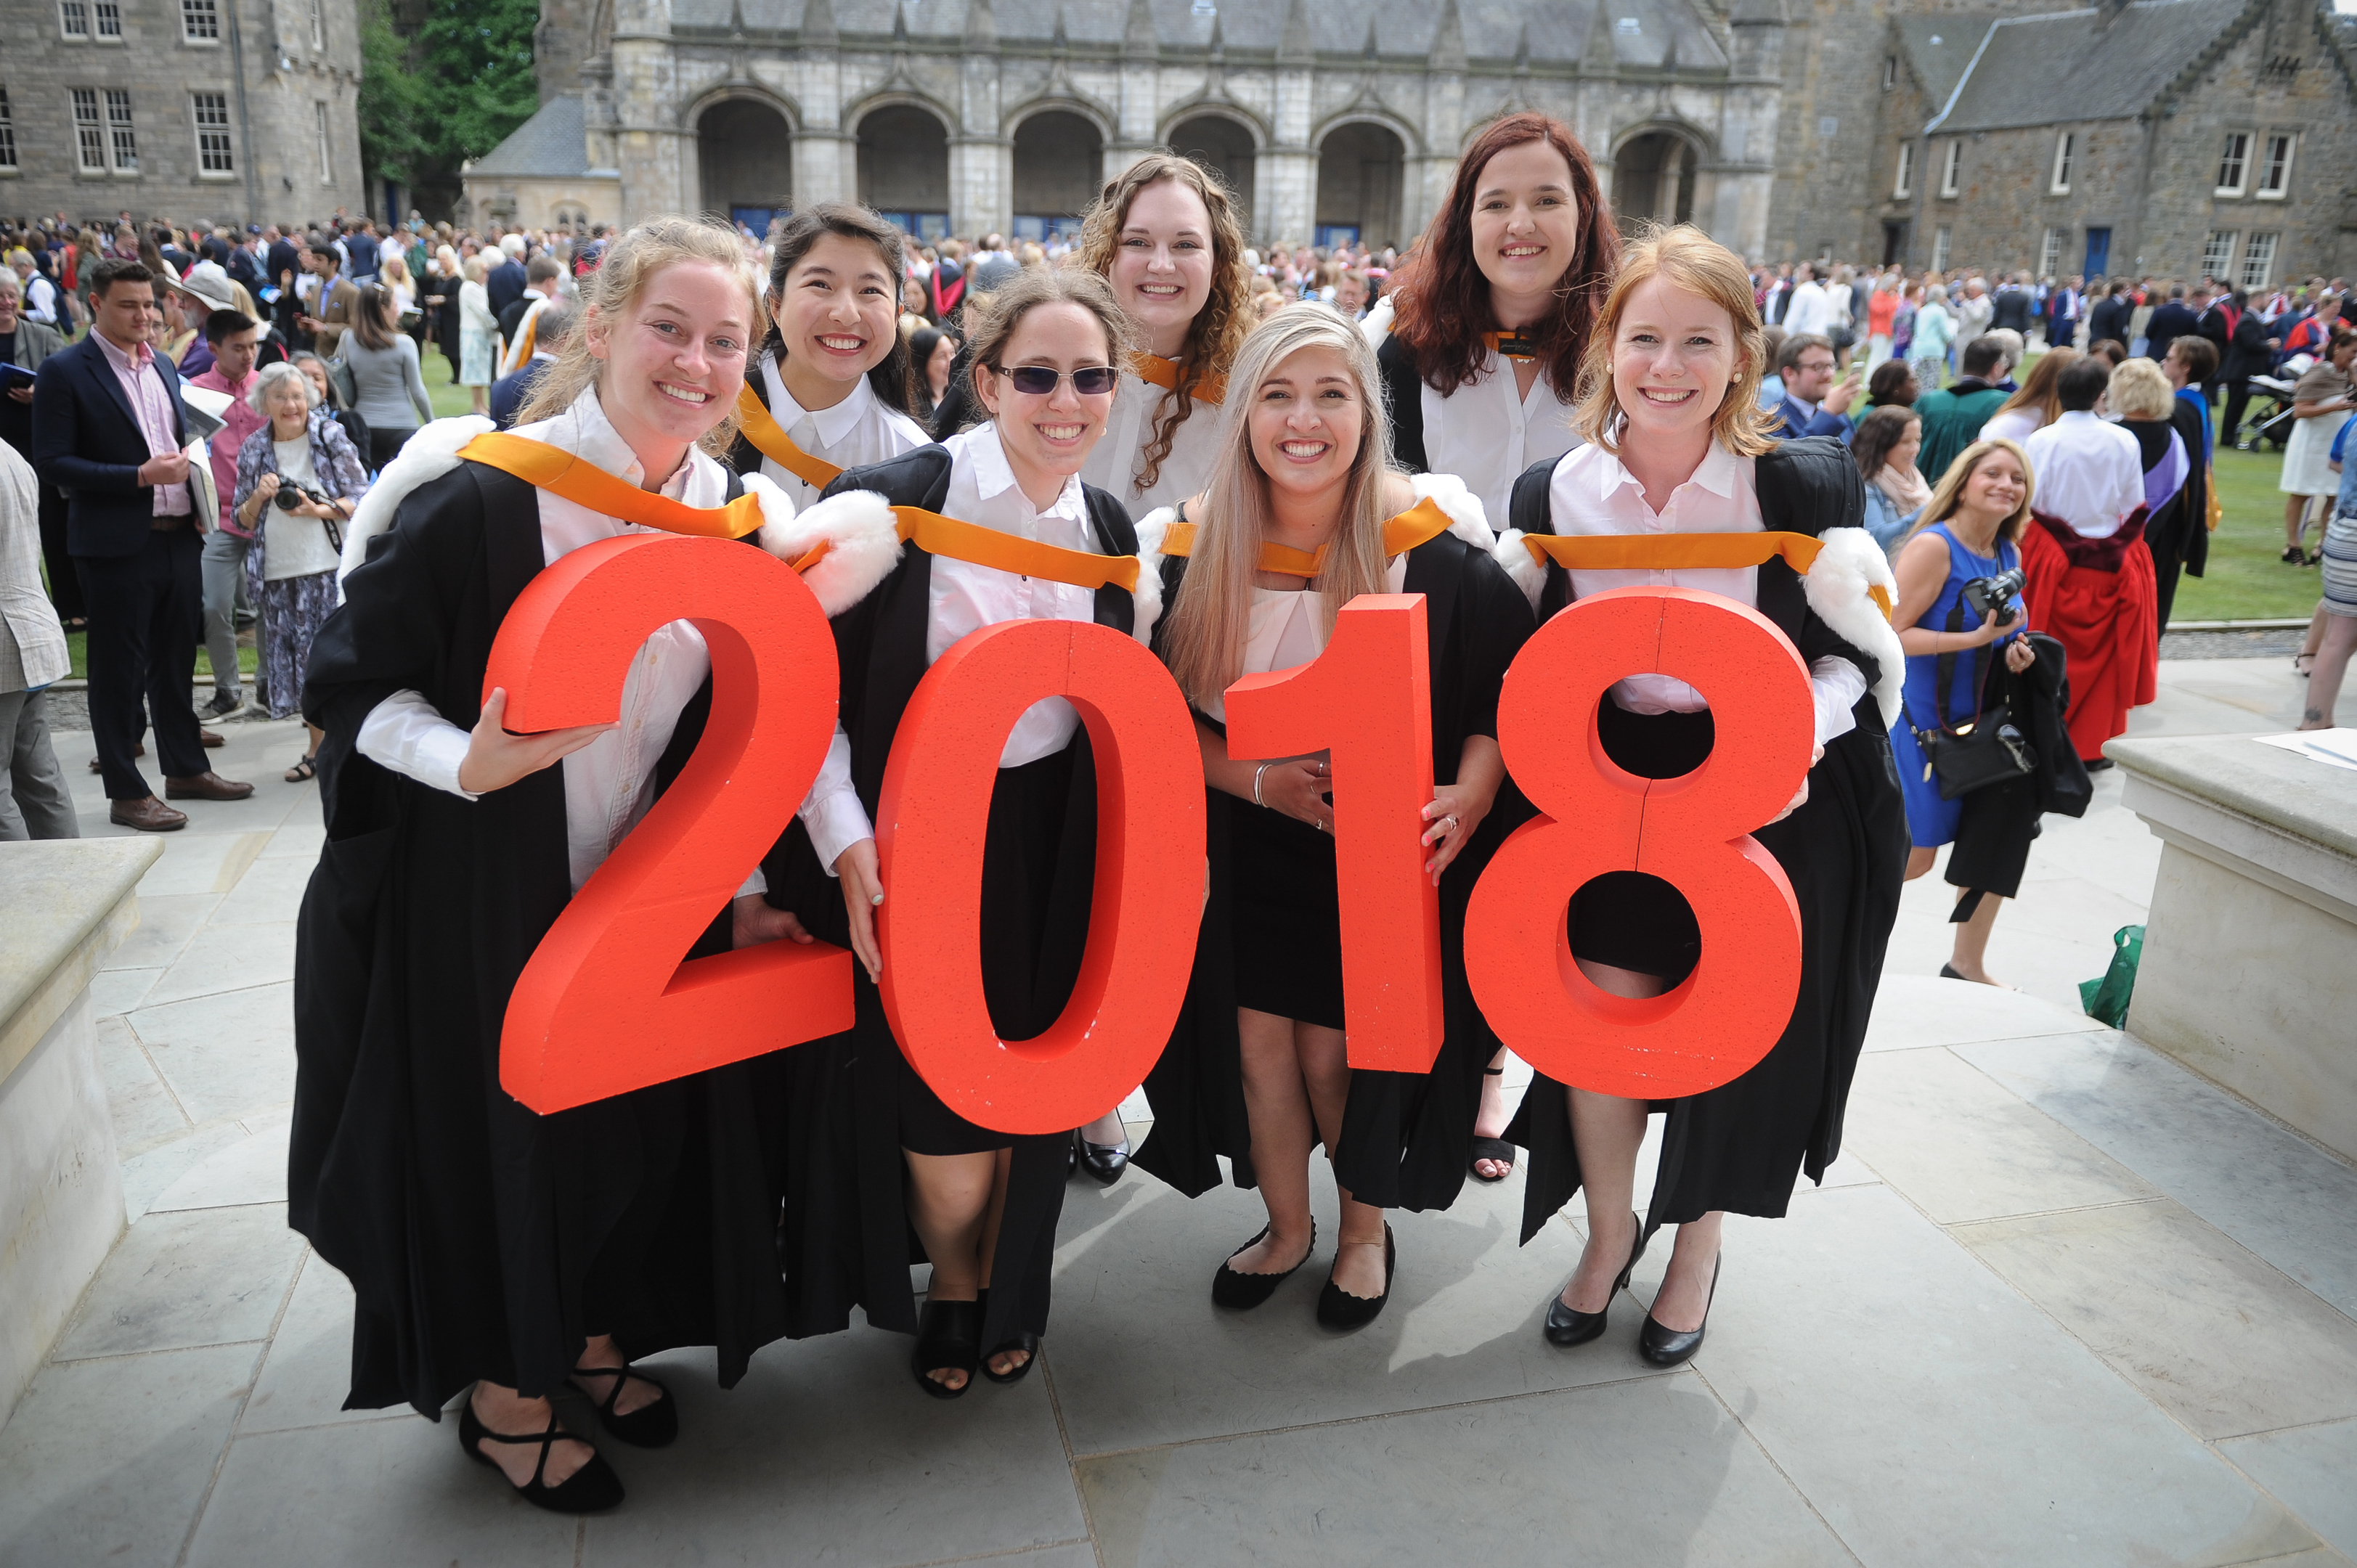 Friends who have graduated with a Joint Degree - back l to r - Anna-Leigh Ong, Georgina Farrington and Ashley Brenton - front - Raney Warner, Paula Wagner, Hannah Richman and Emily Asinger, St Salvators Quad.